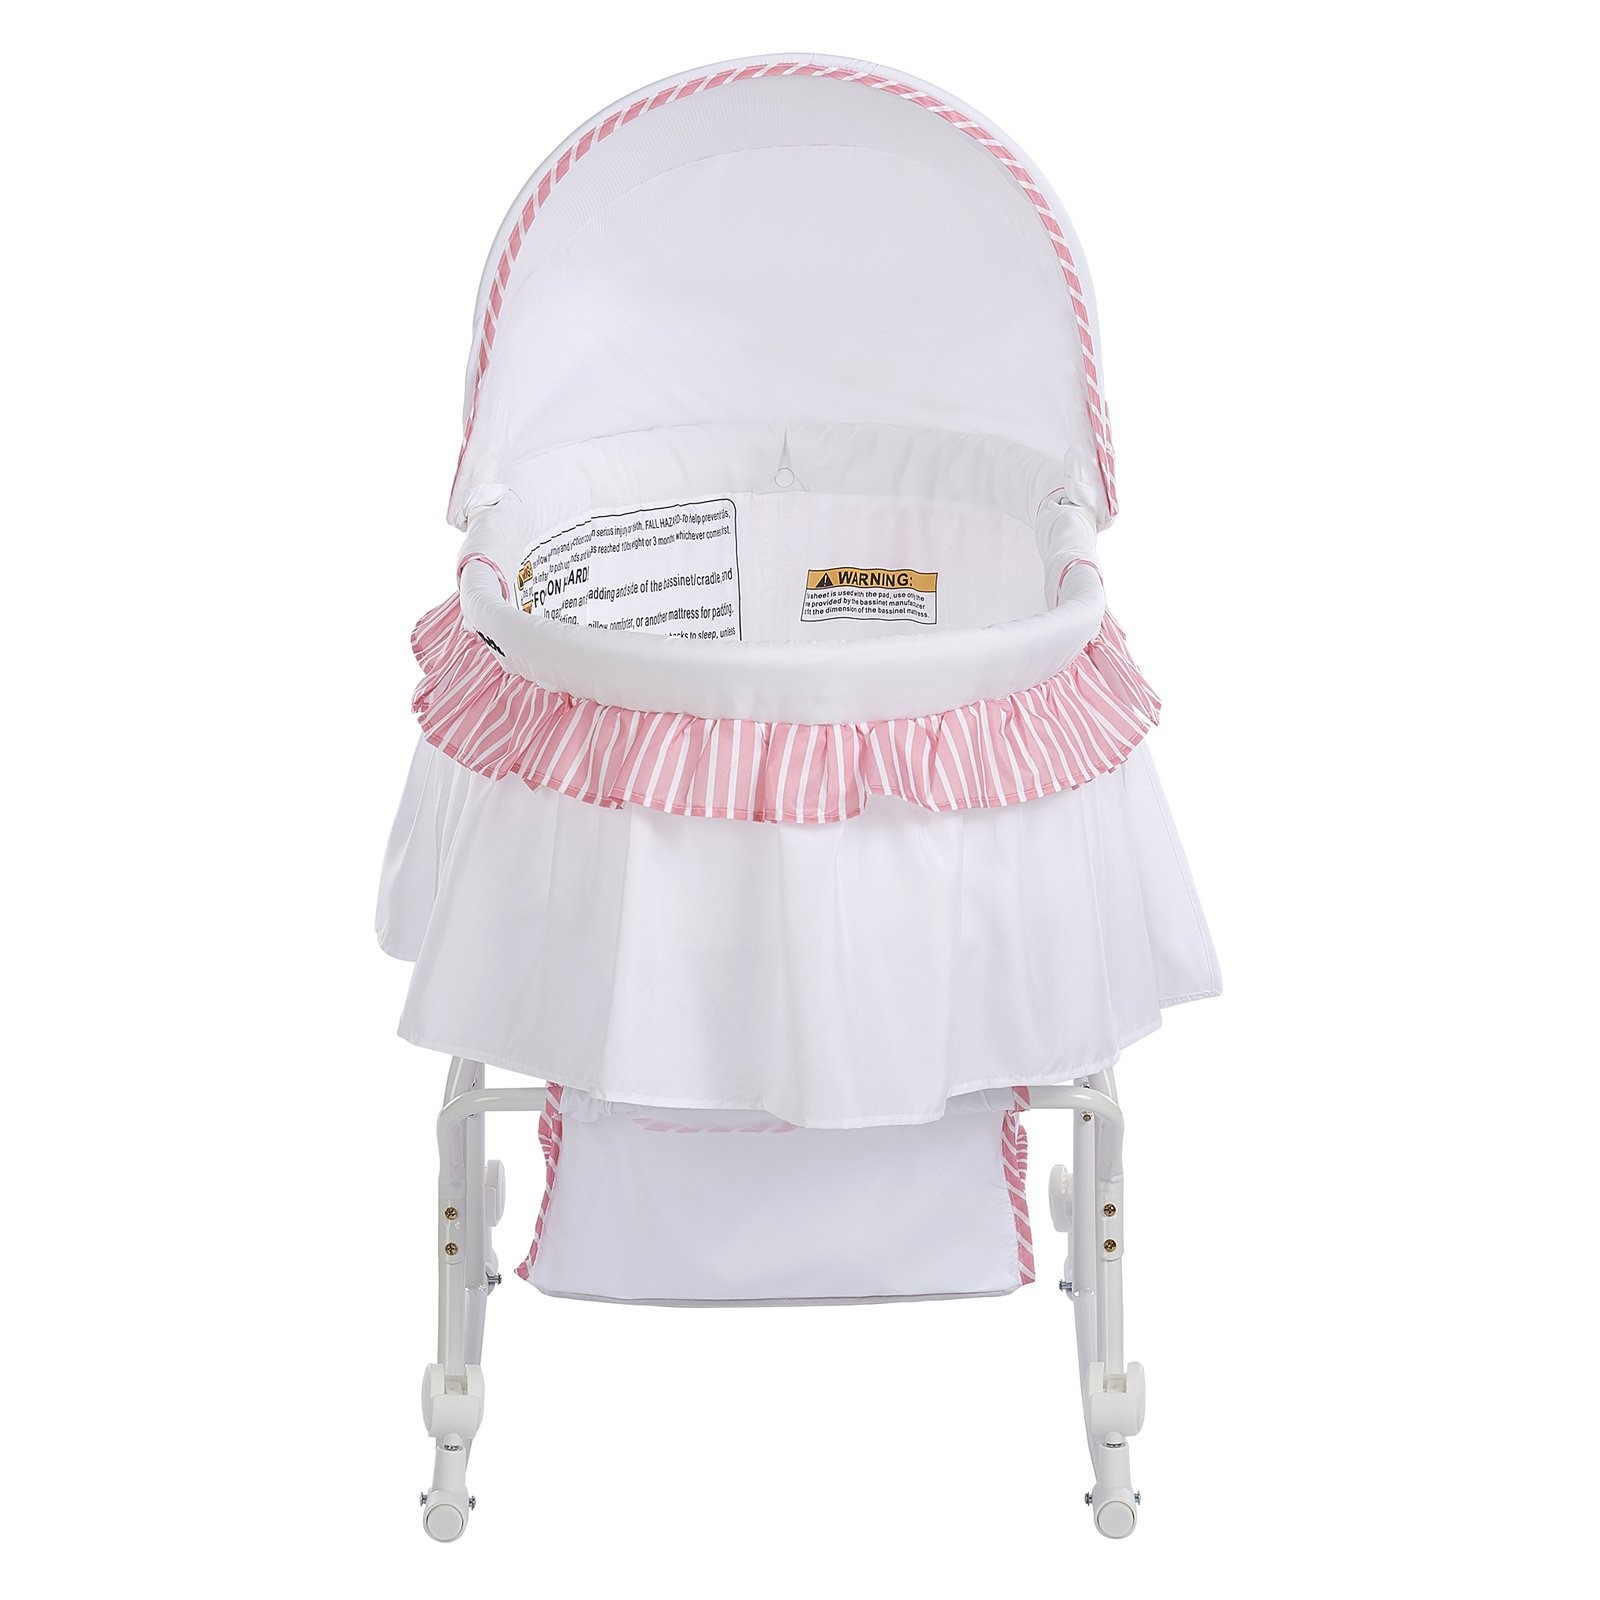 Dream On Me Lacy Portable 2-in-1 Bassinet & Cradle in Pink and White, Lightweight Baby Bassinet - image 2 of 7